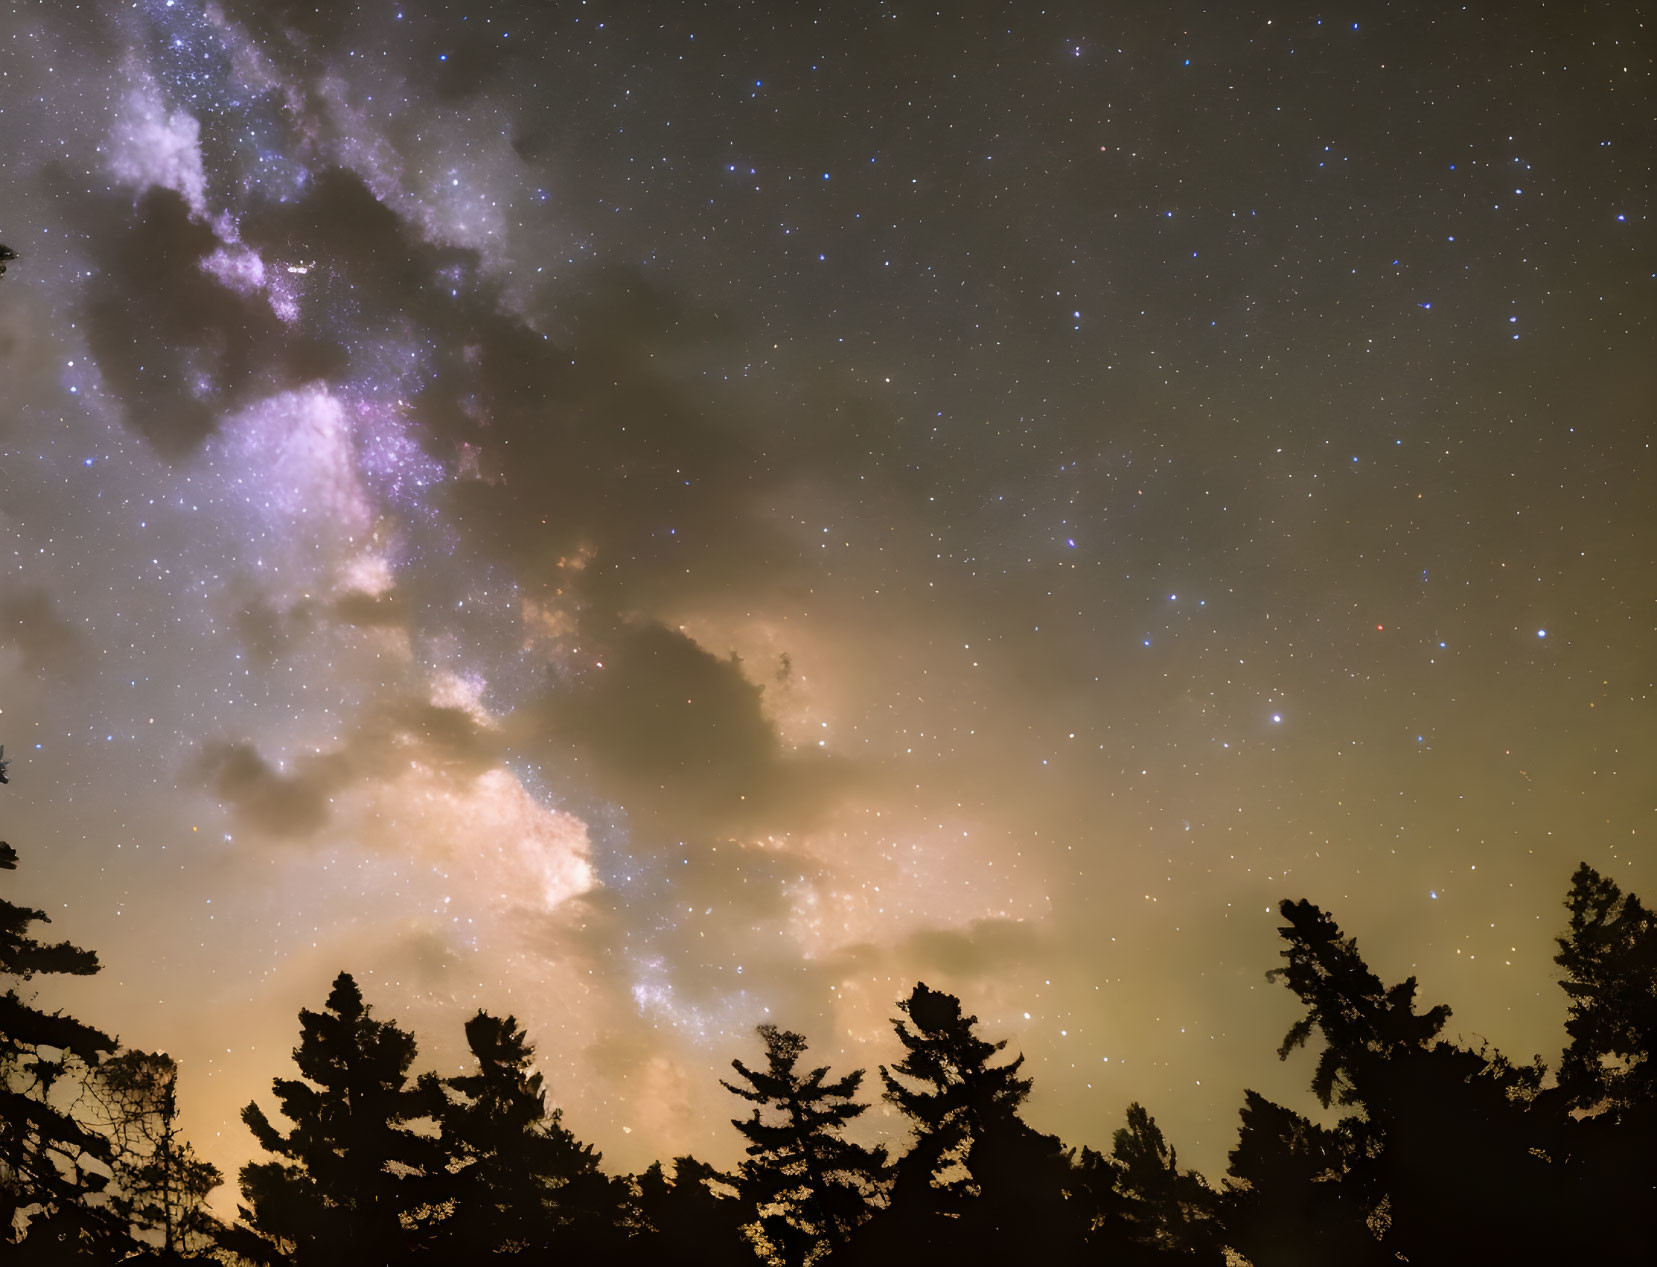 Night sky with Milky Way over forest trees.